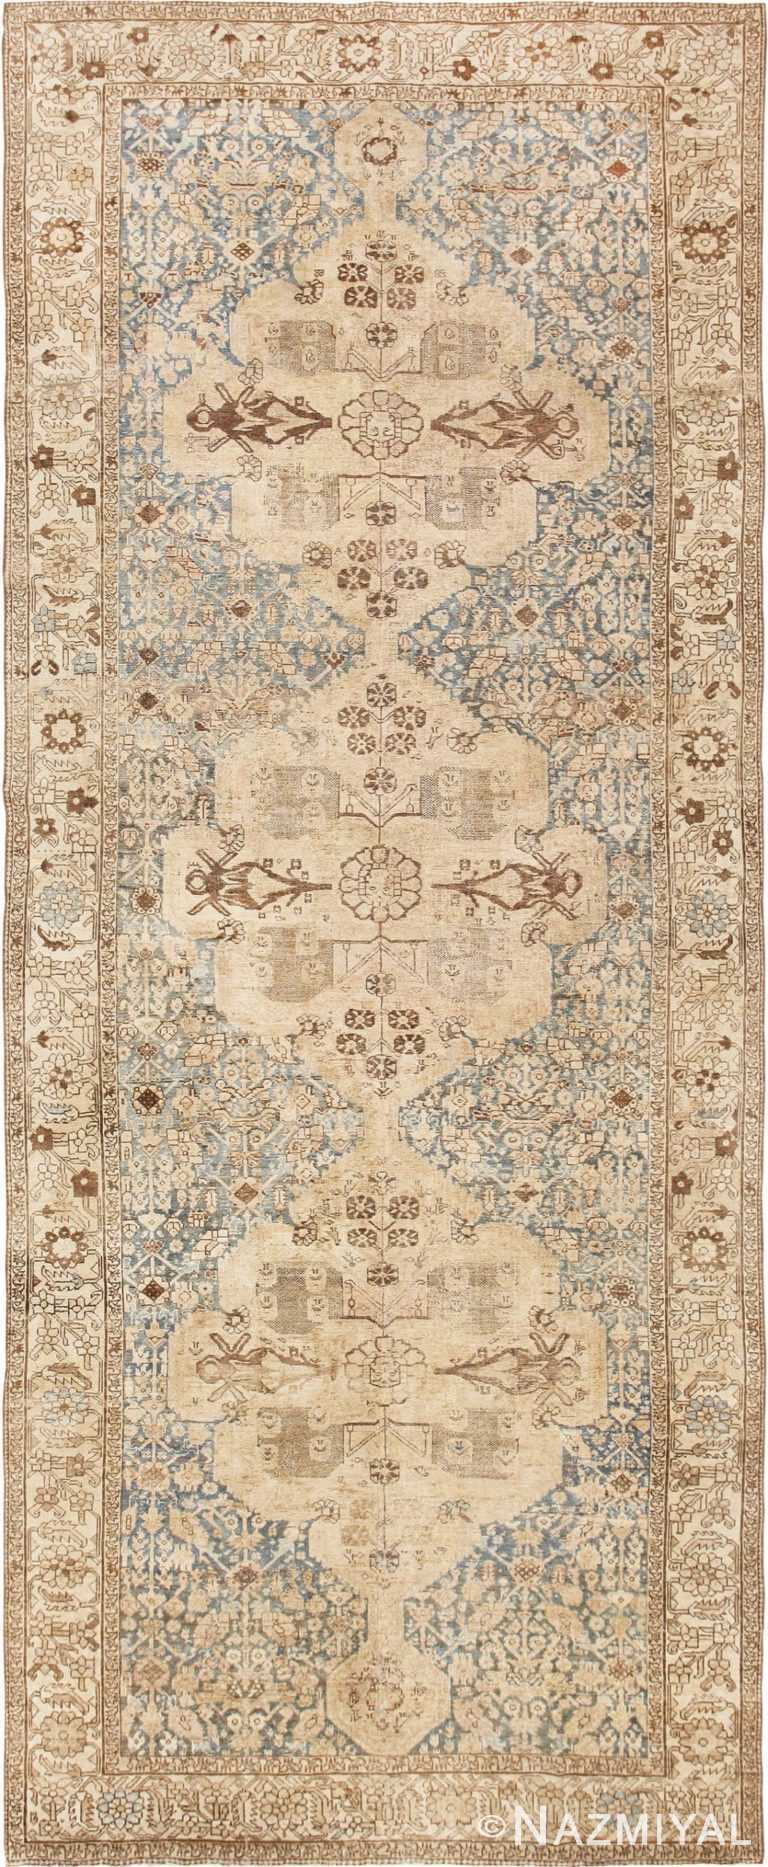 Gallery Size Shabby Chic Antique Persian Malayer Rug 50543 by Nazmiyal Antique Rugs in NYC